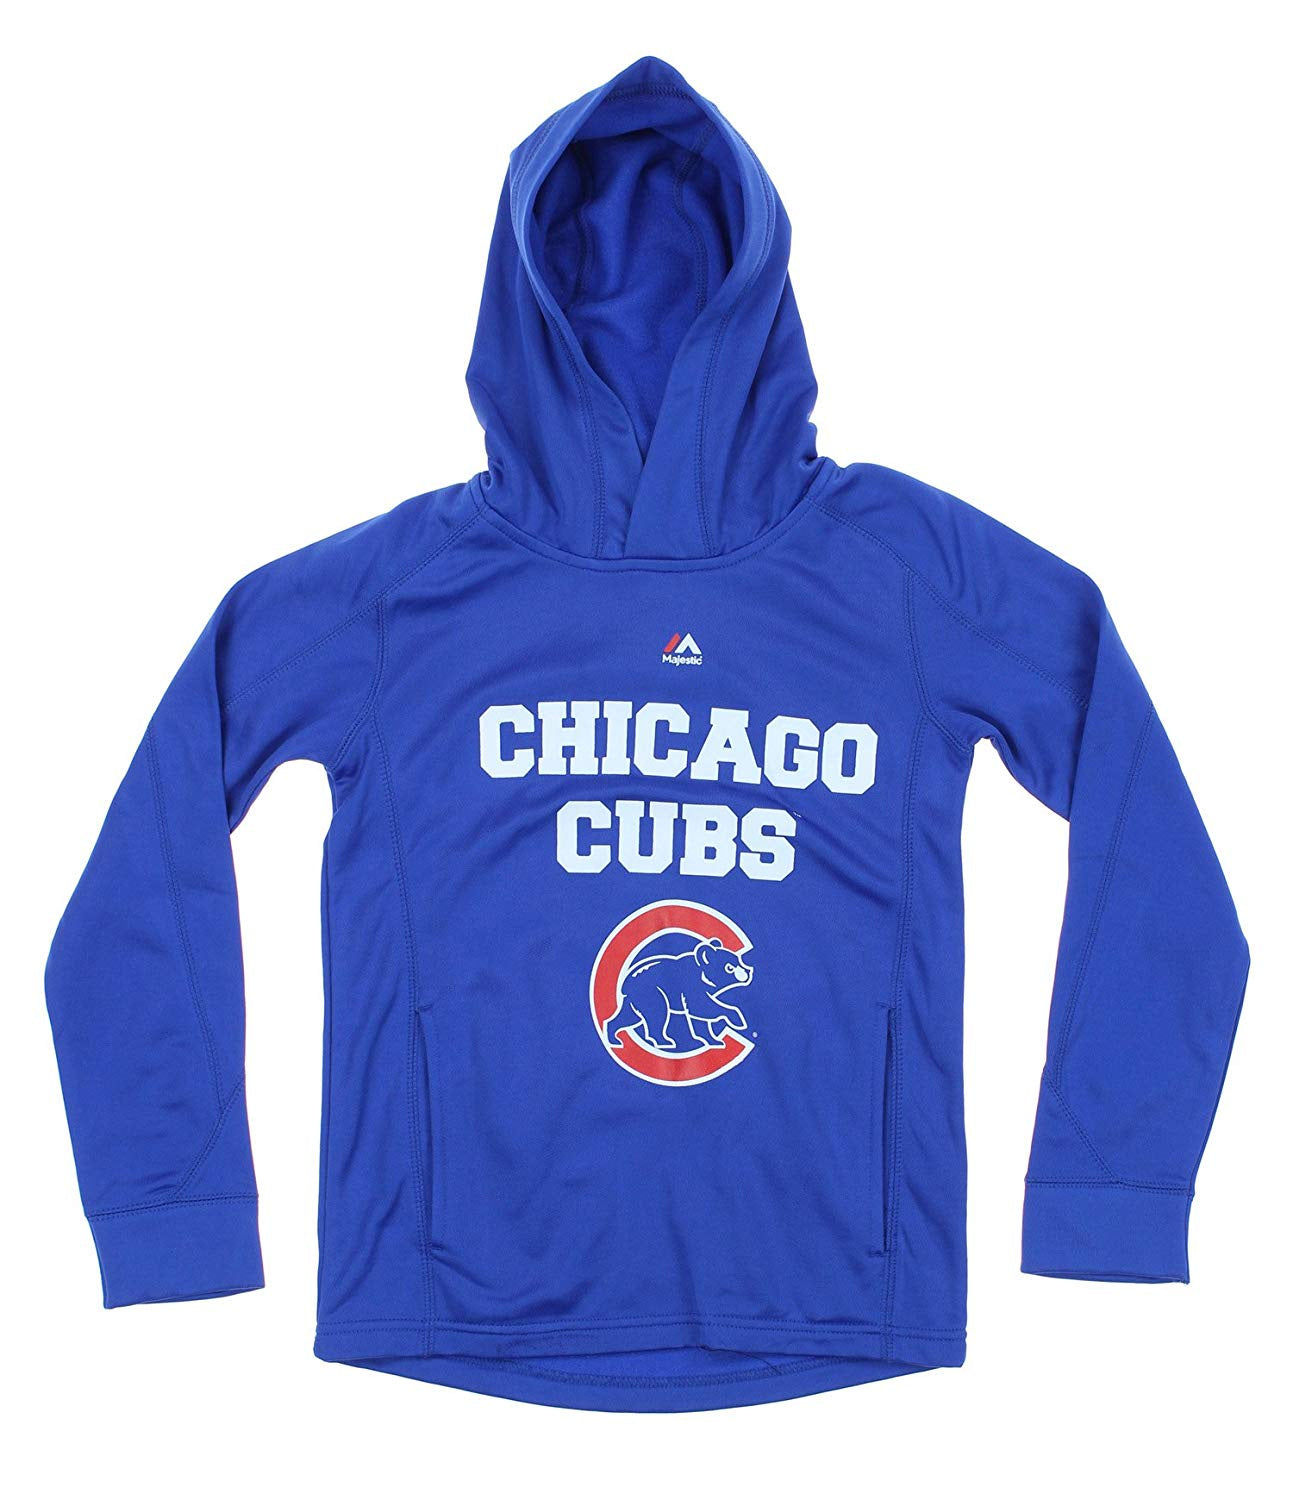 Chicago Cubs MLB Youth Team Fleece Performance Hoodie